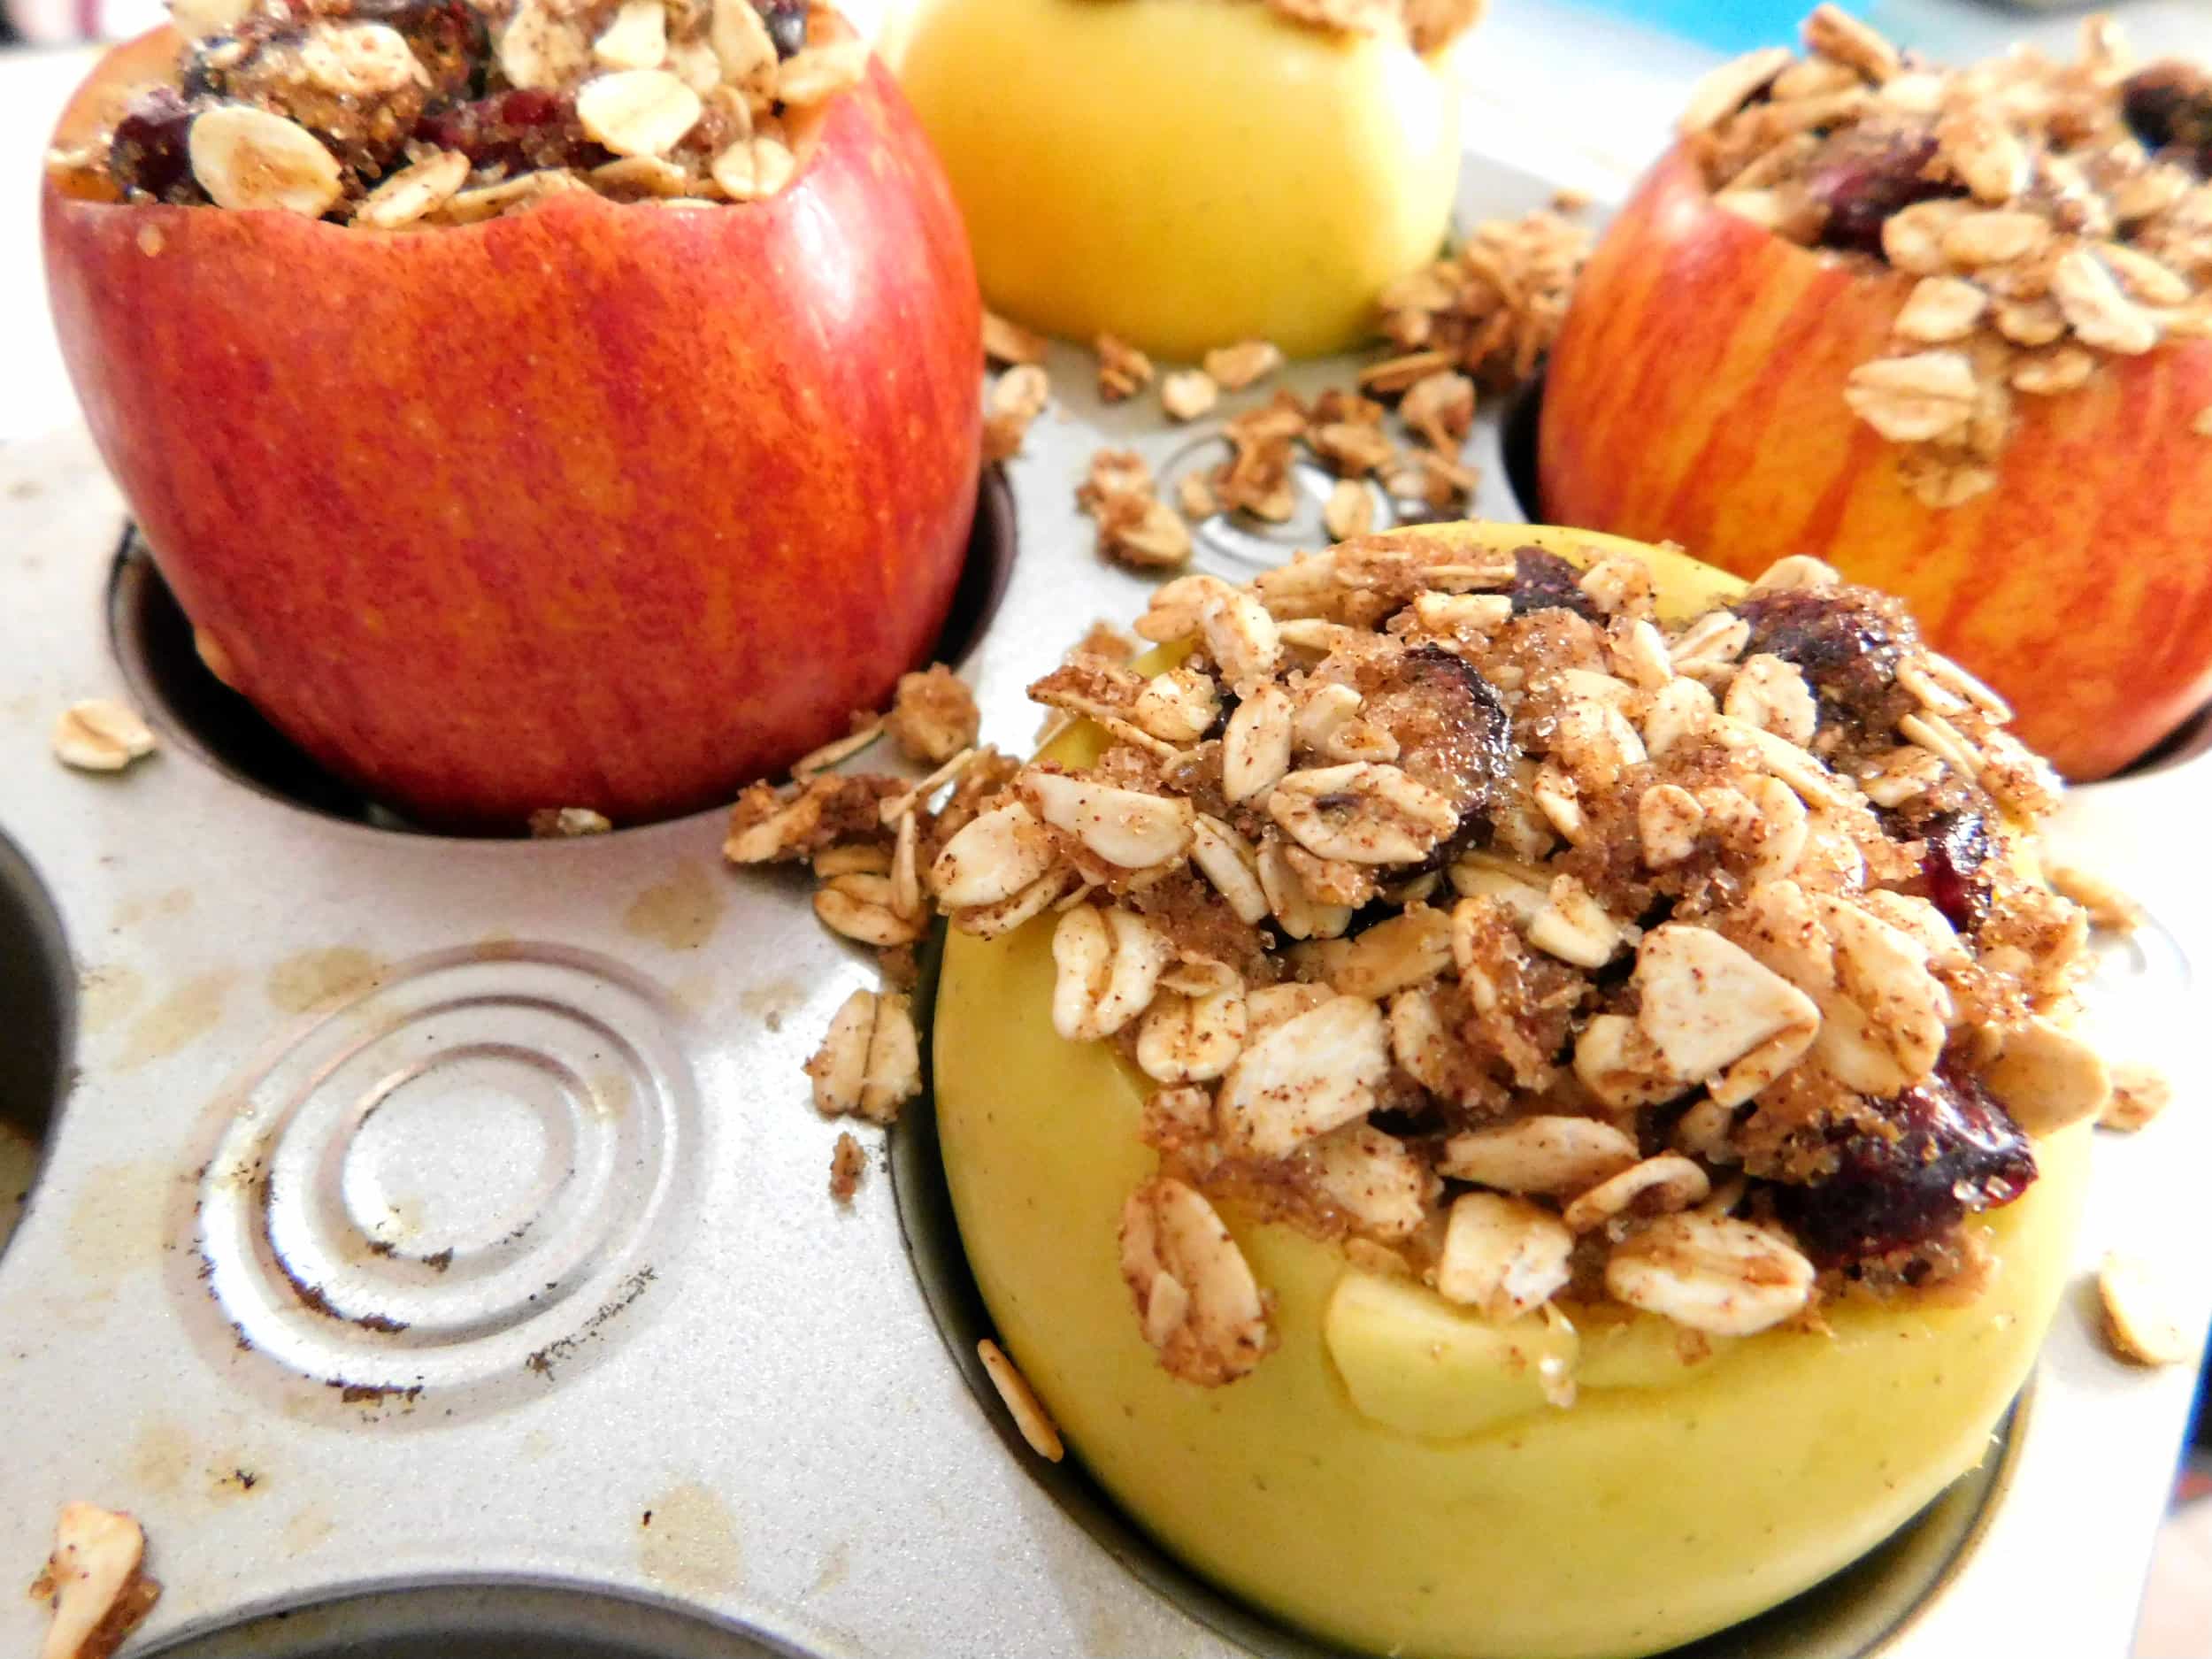 baked apples stuffed with oats and pumpkin spice